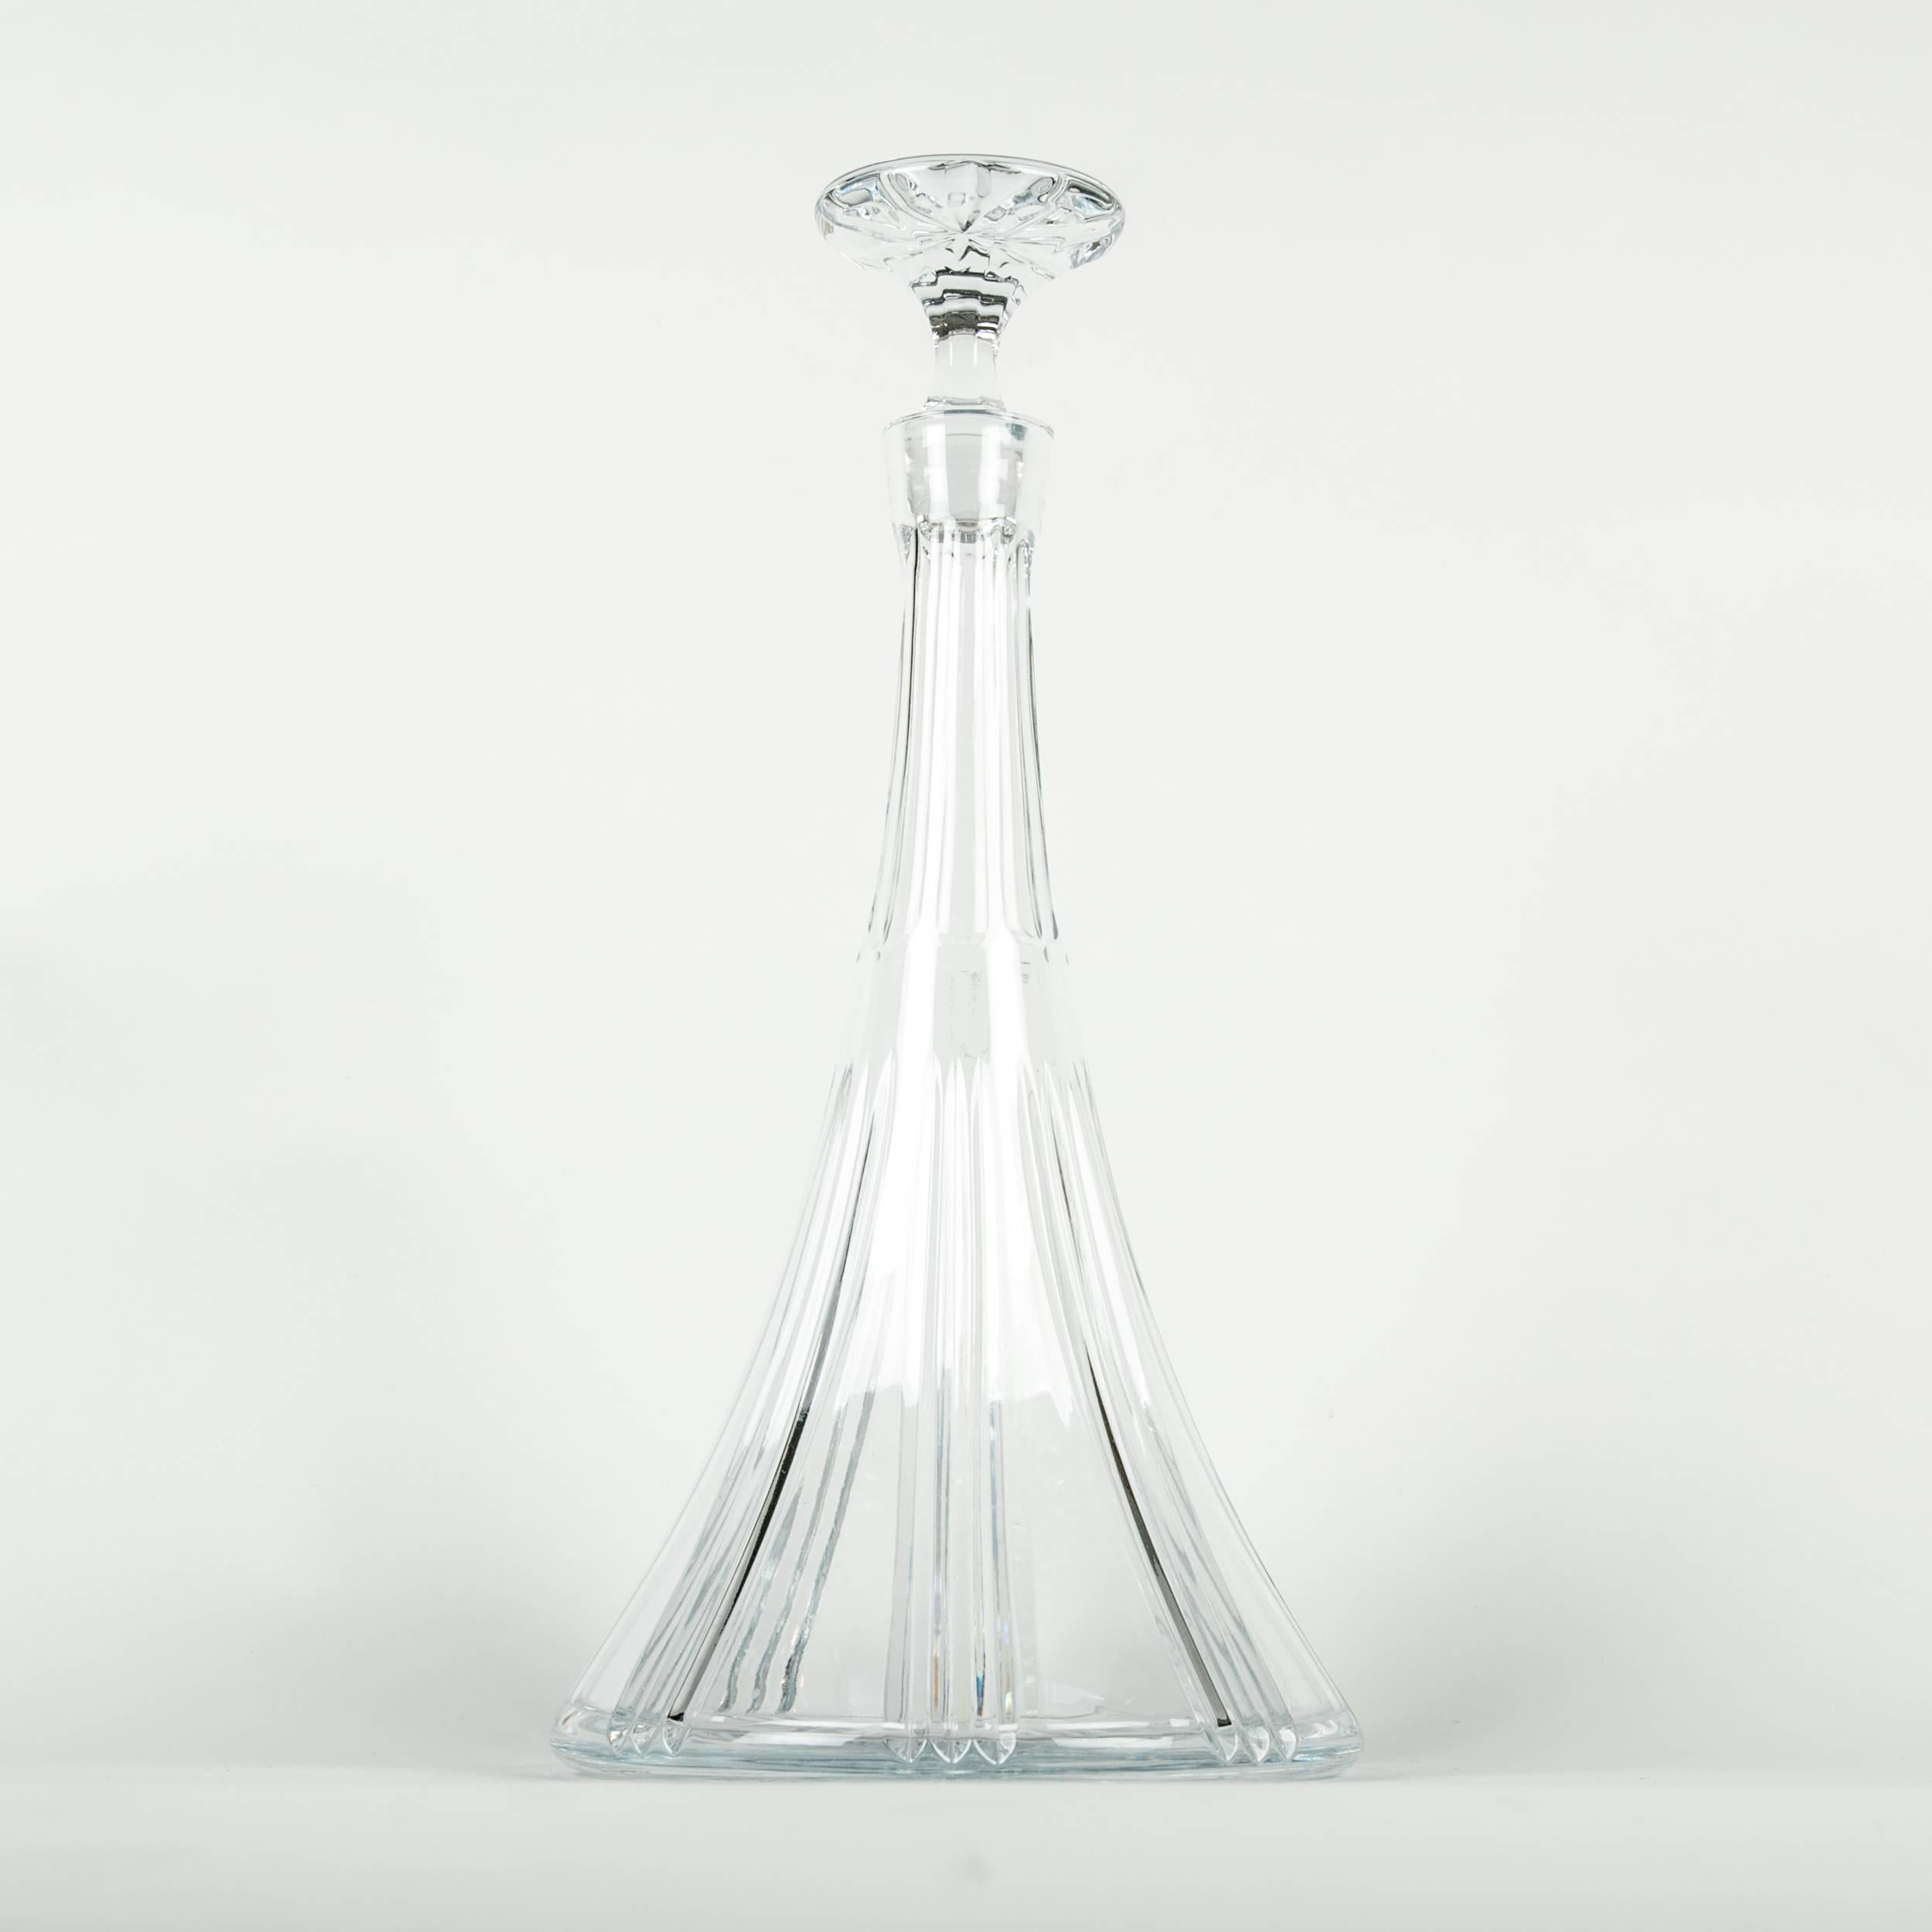 Vintage cut crystal decanter. The decanter measure 14.5 inches high x 8.5 inches diameter.